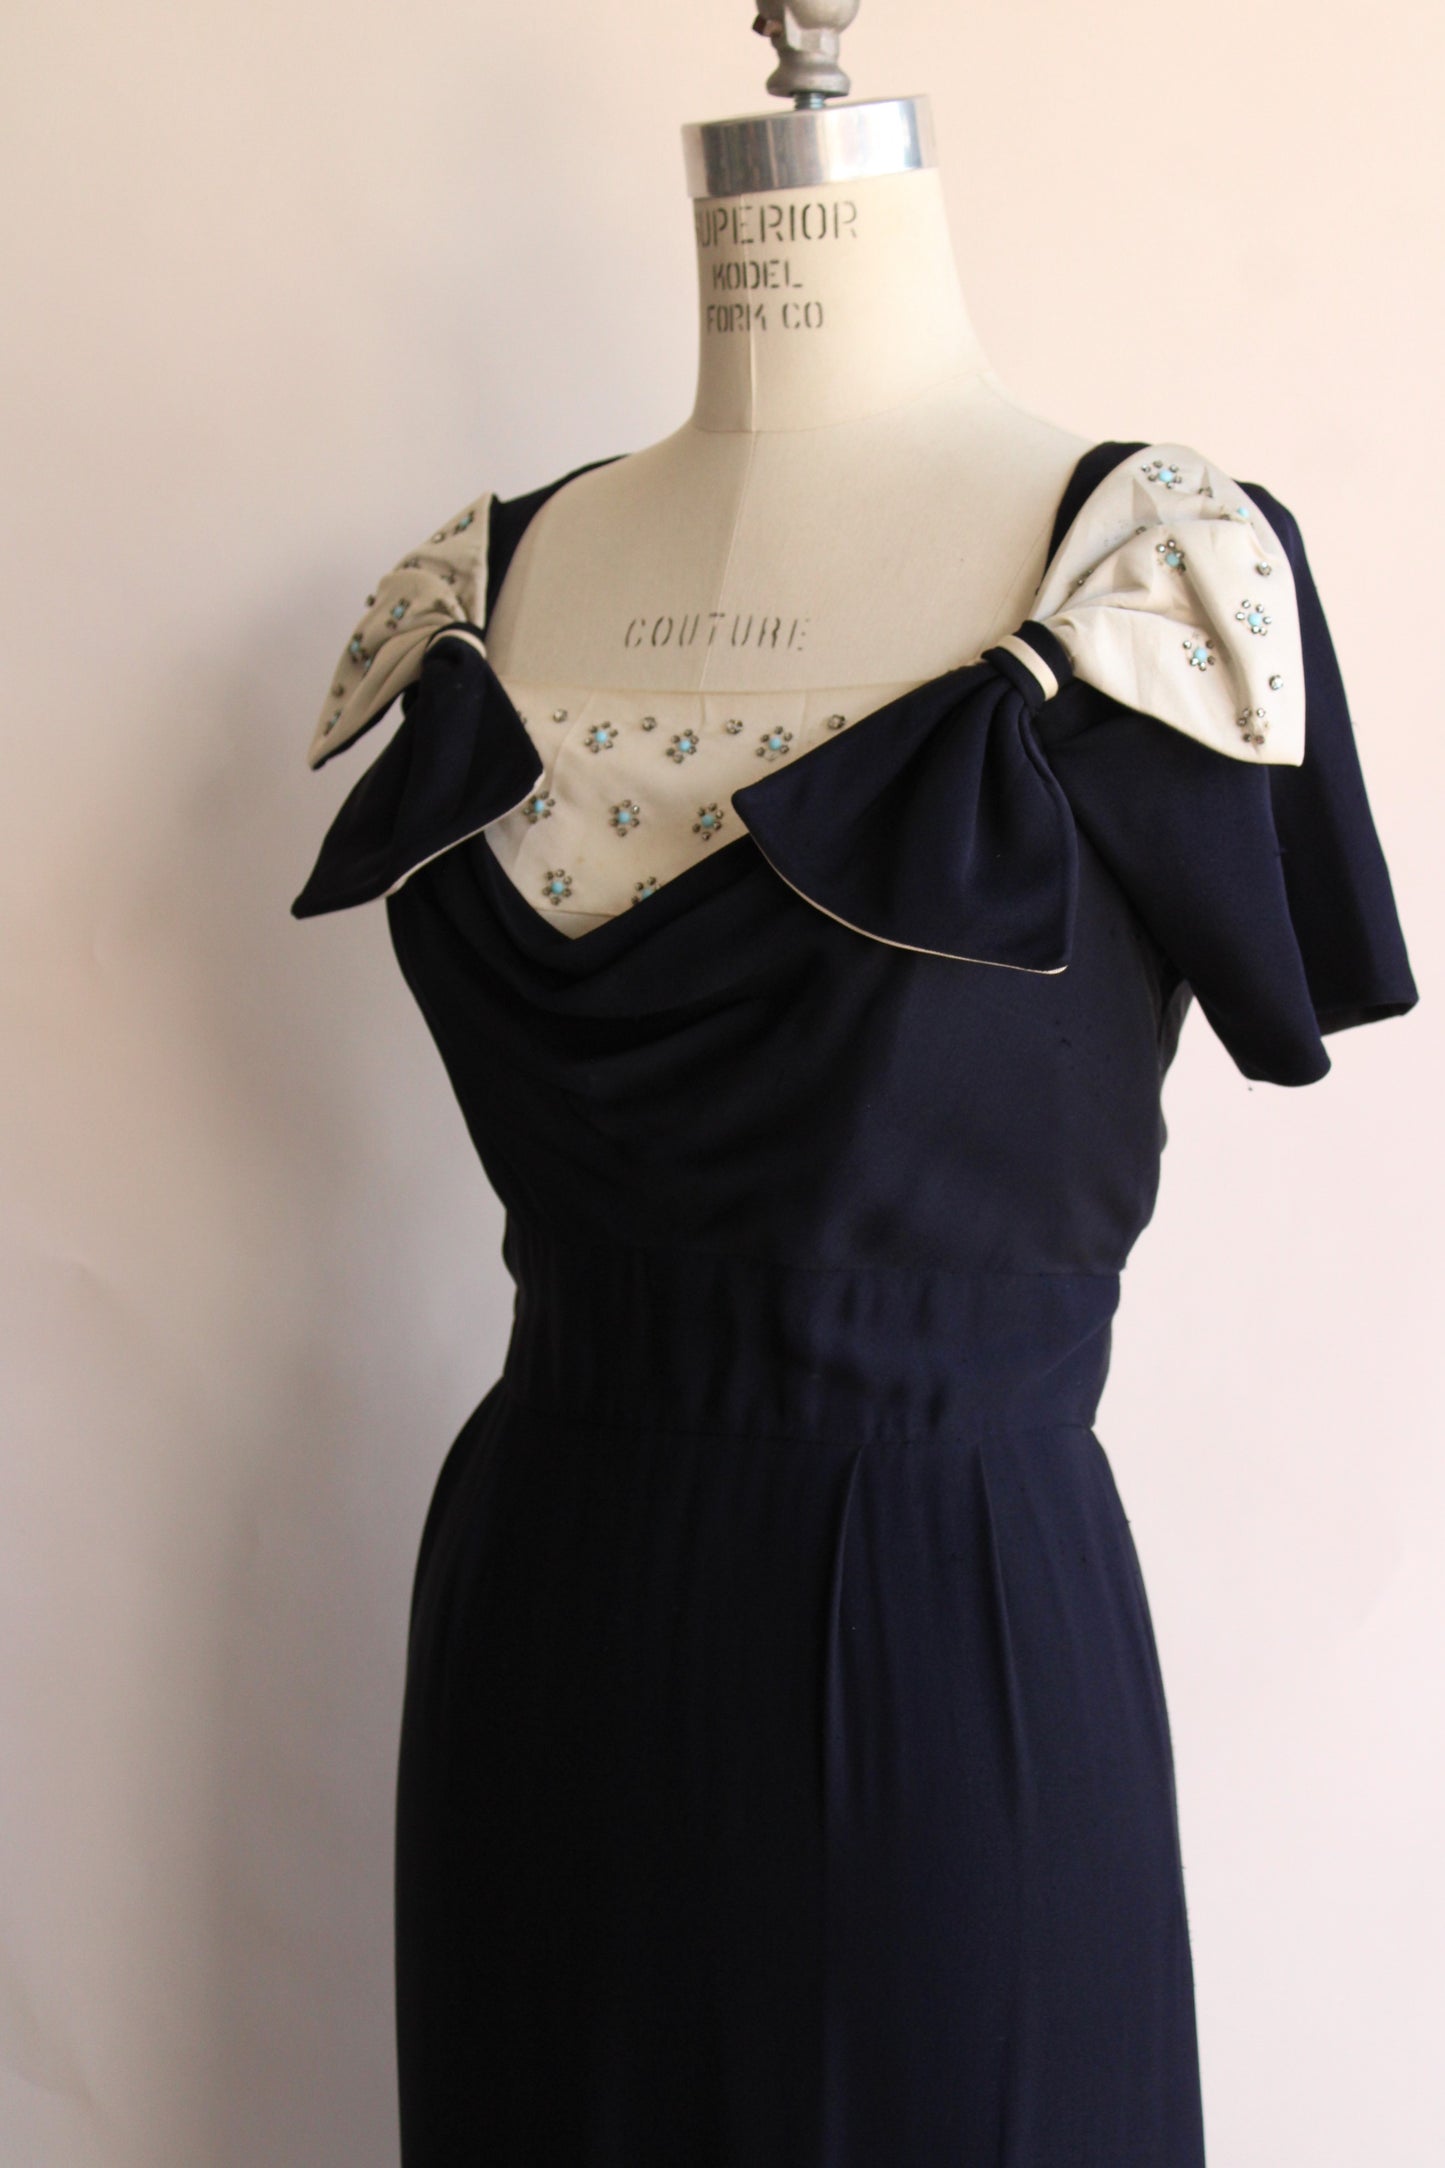 Vintage 1950s Navy Blue Cocktail Dress with Rhinestones